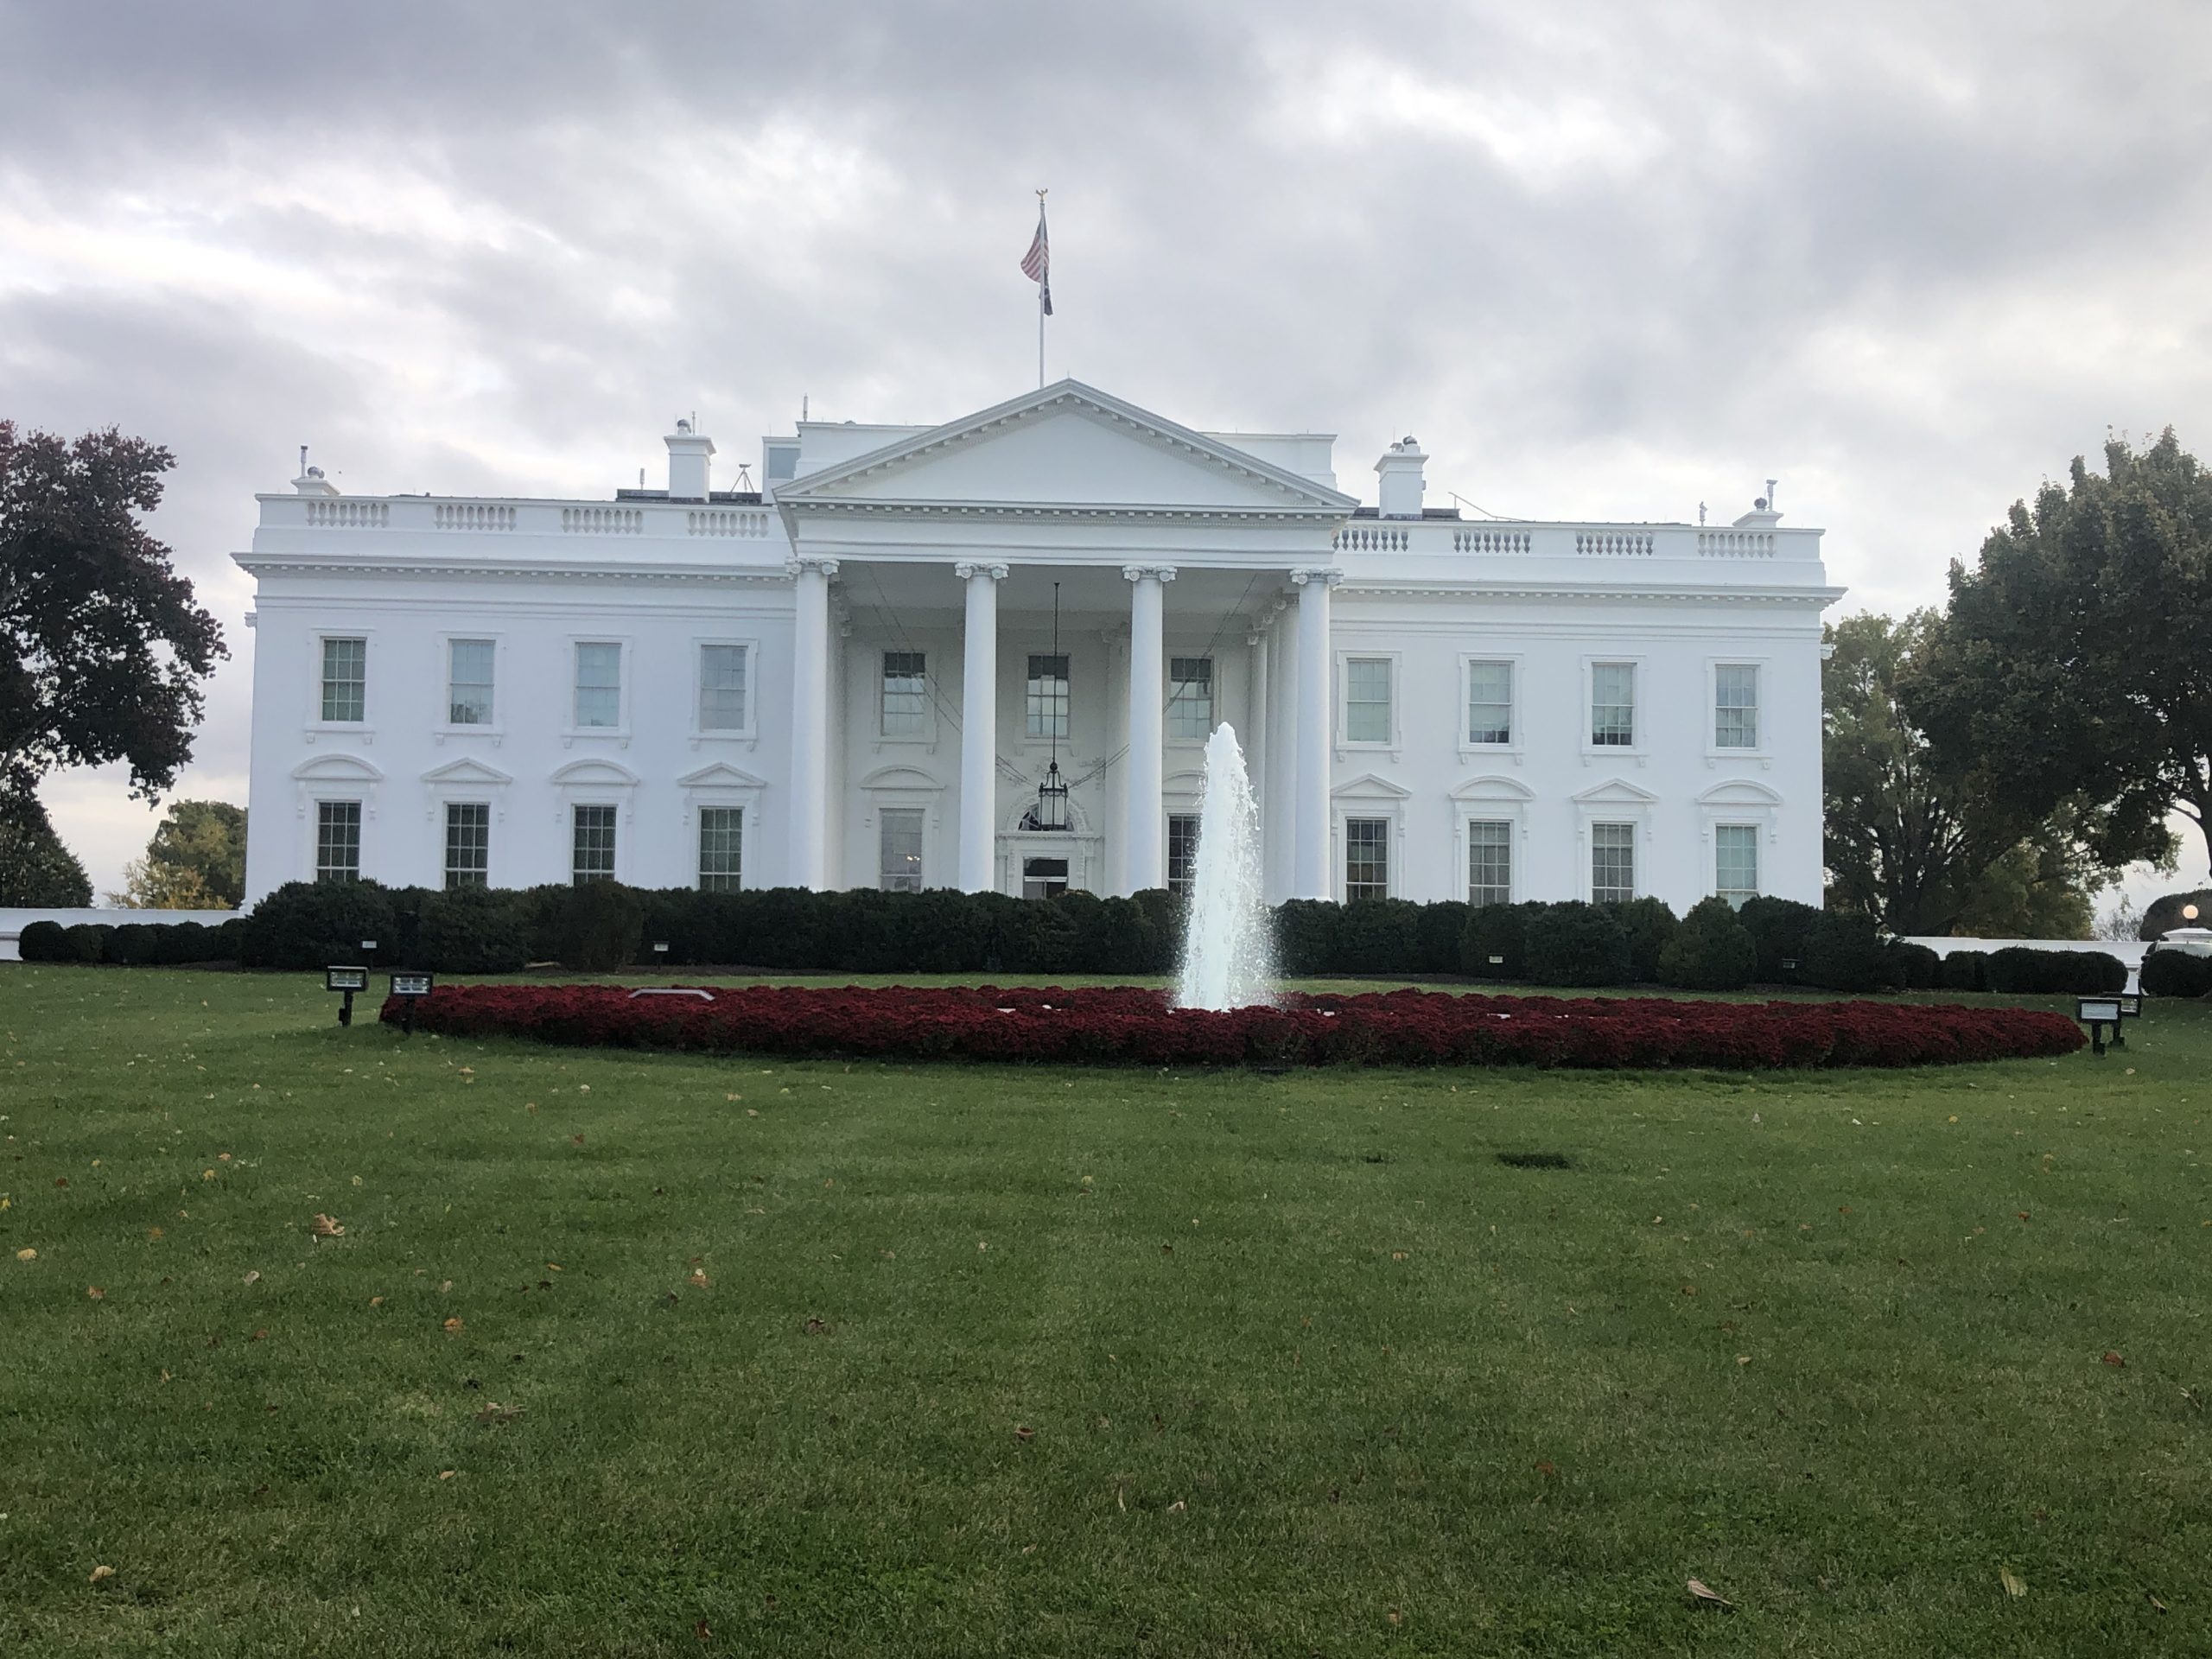 The White House.Photo by The Signal Reporter Karsyn Coxie.